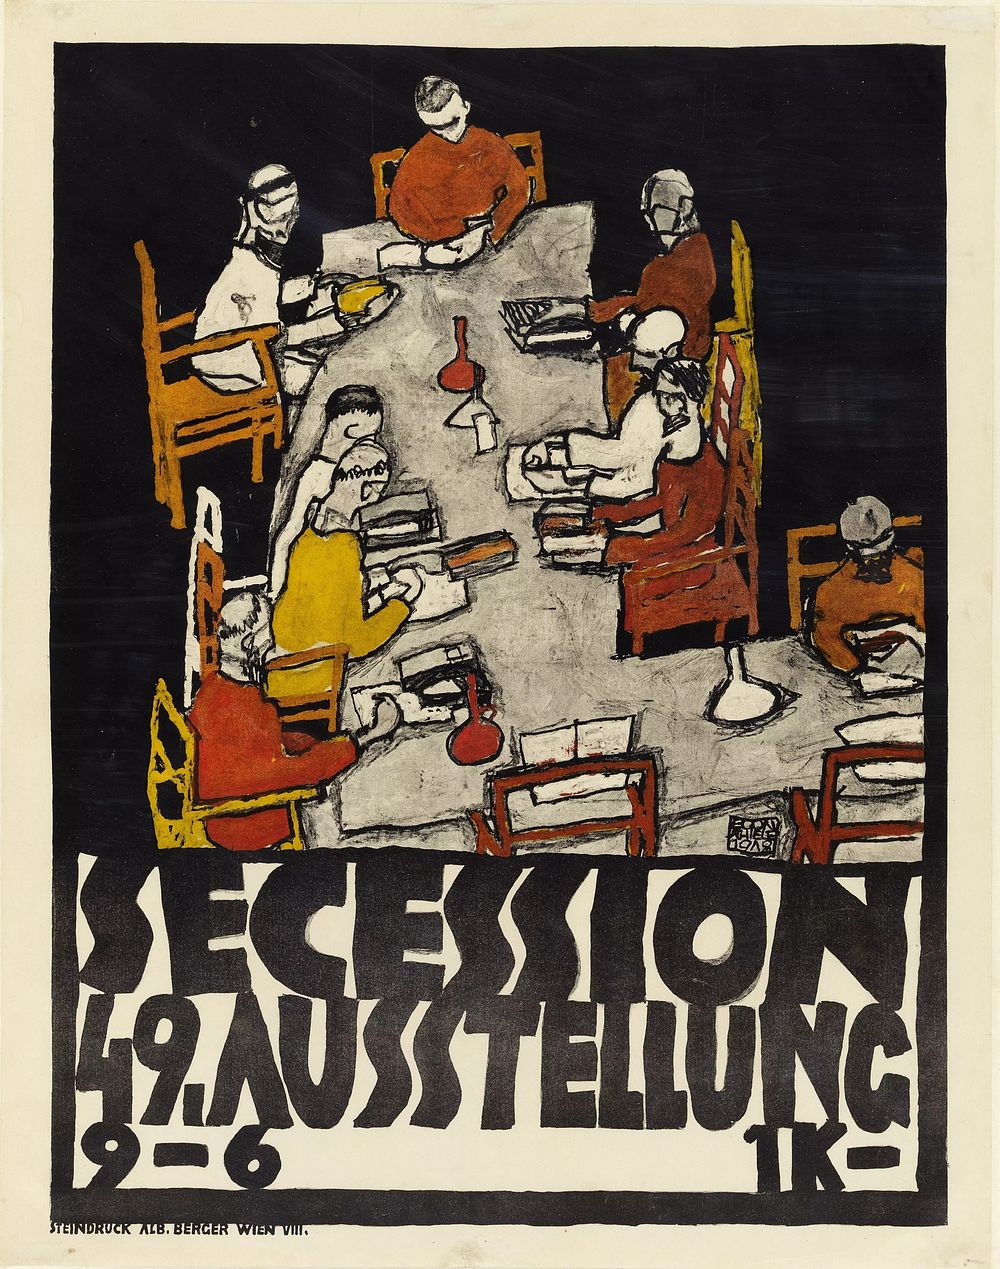 Poster for the 49th Secession exhibition by Egon Schiele